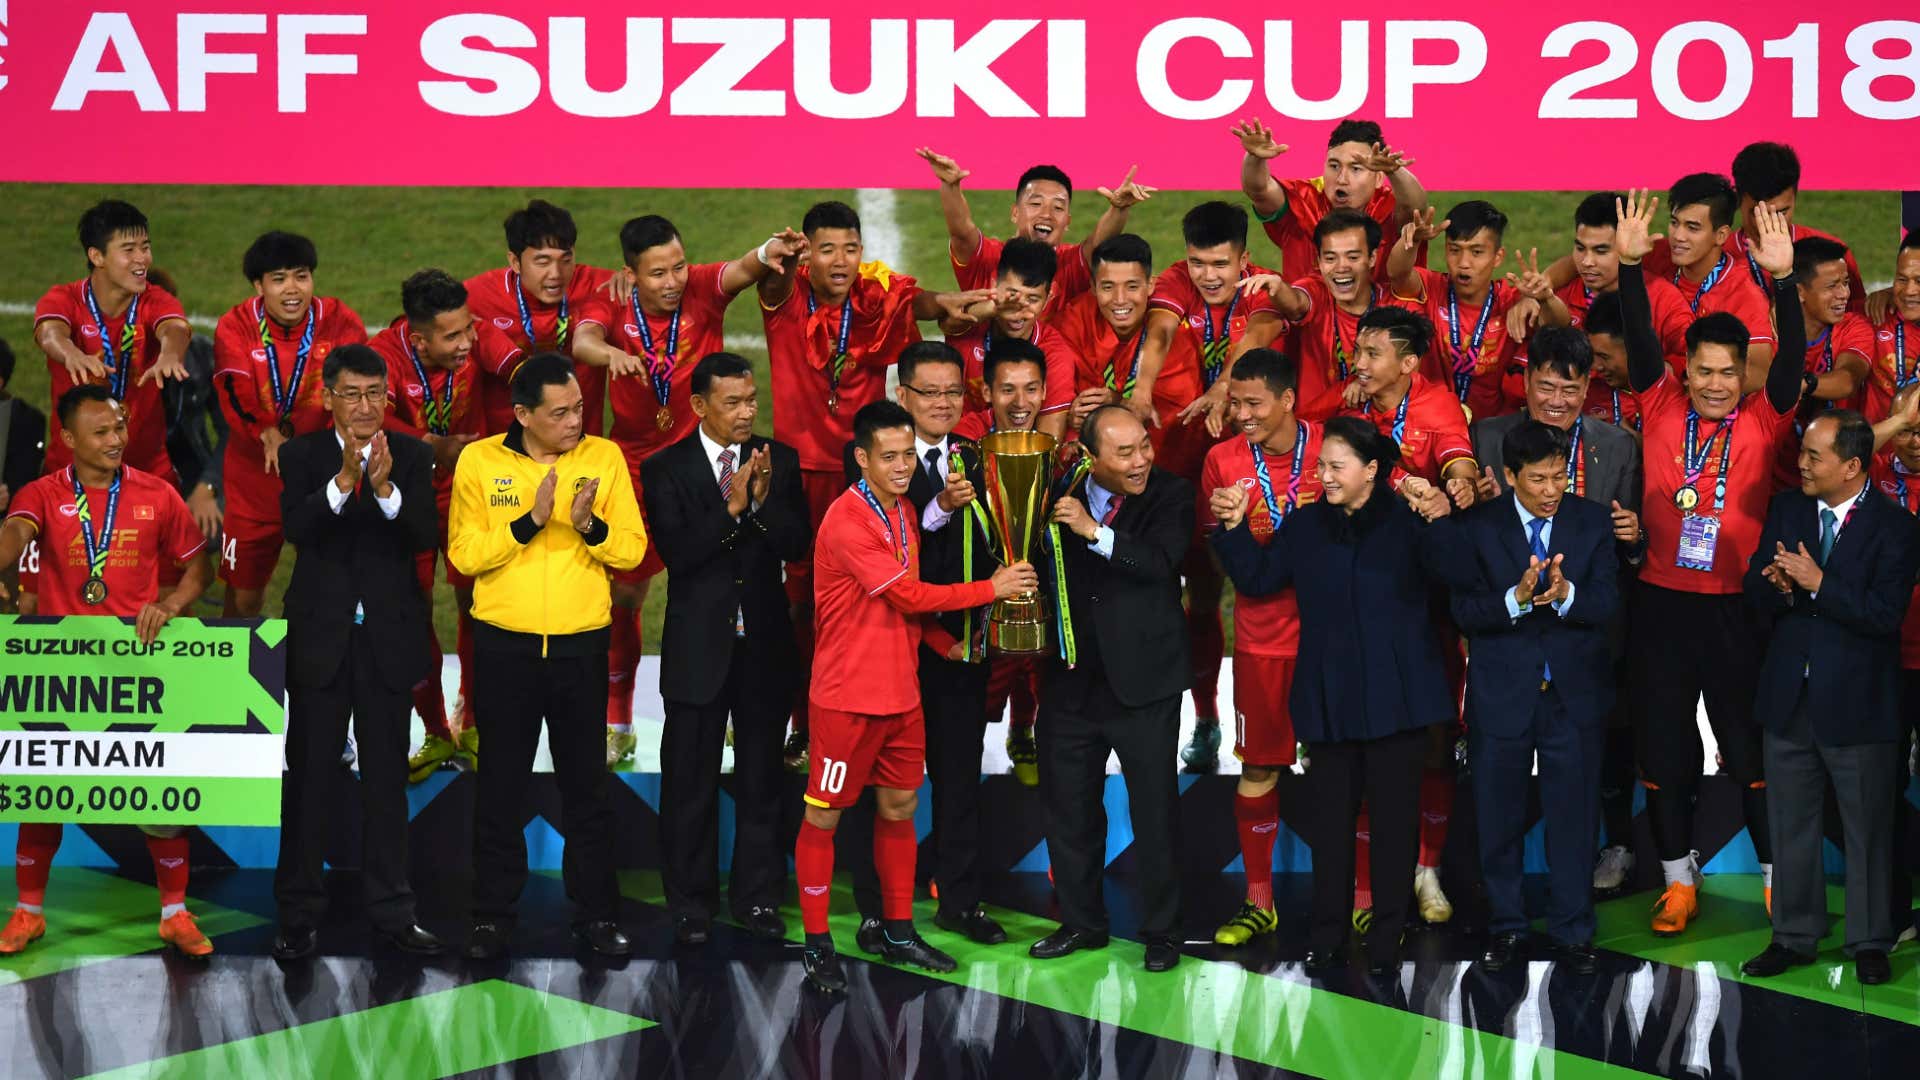 Photo of AFF Suzuki Cup champions: Every single AFF Championship winner from 1996 until 2018